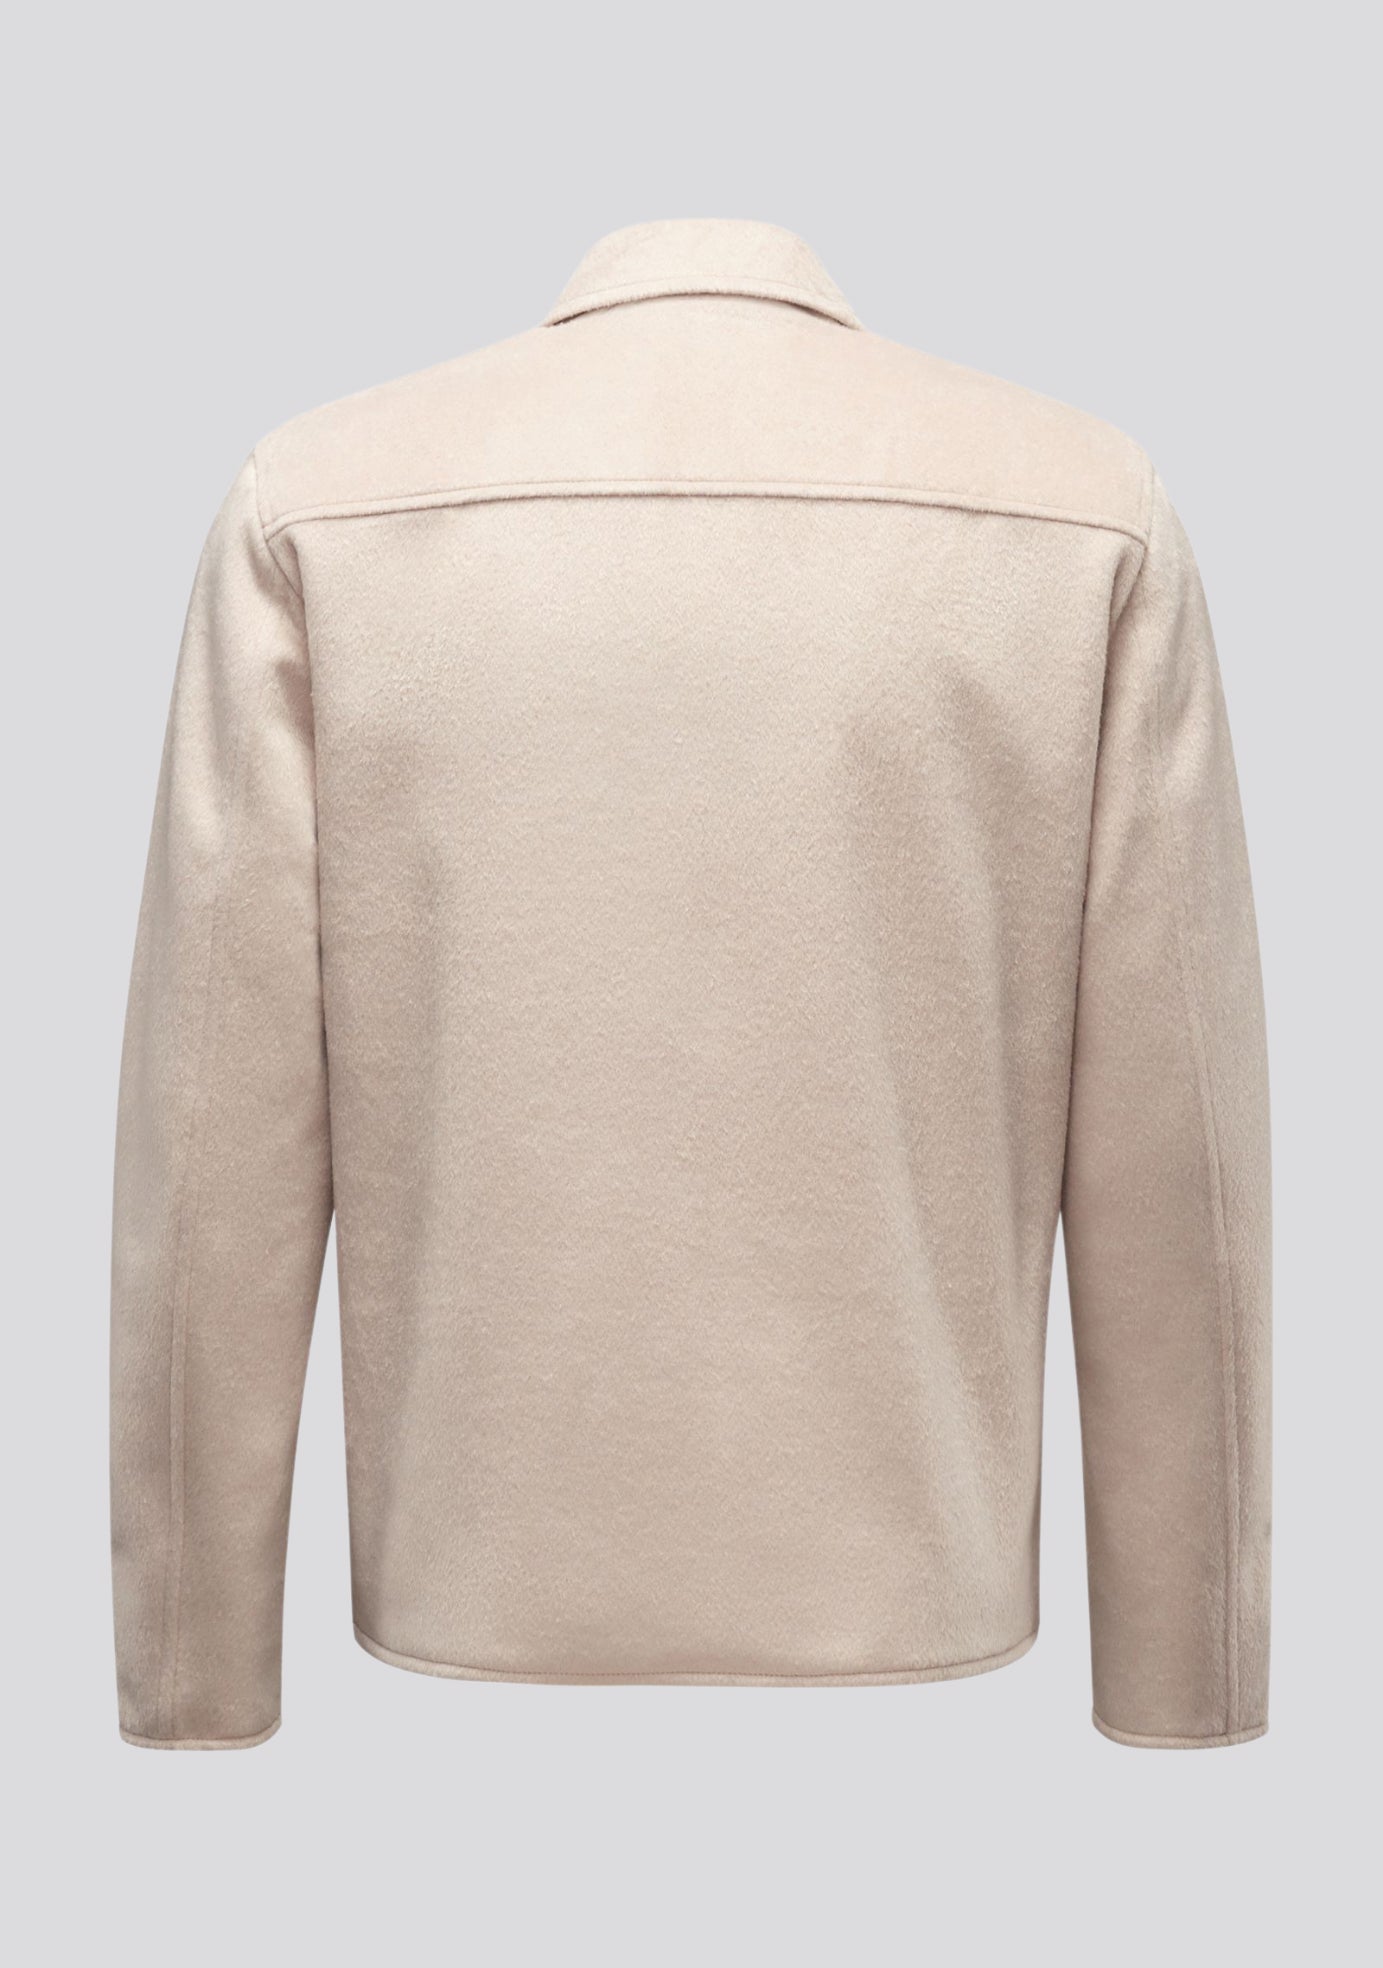 Double faced Wool and Nylon Beige Jacket Kired Collaboration